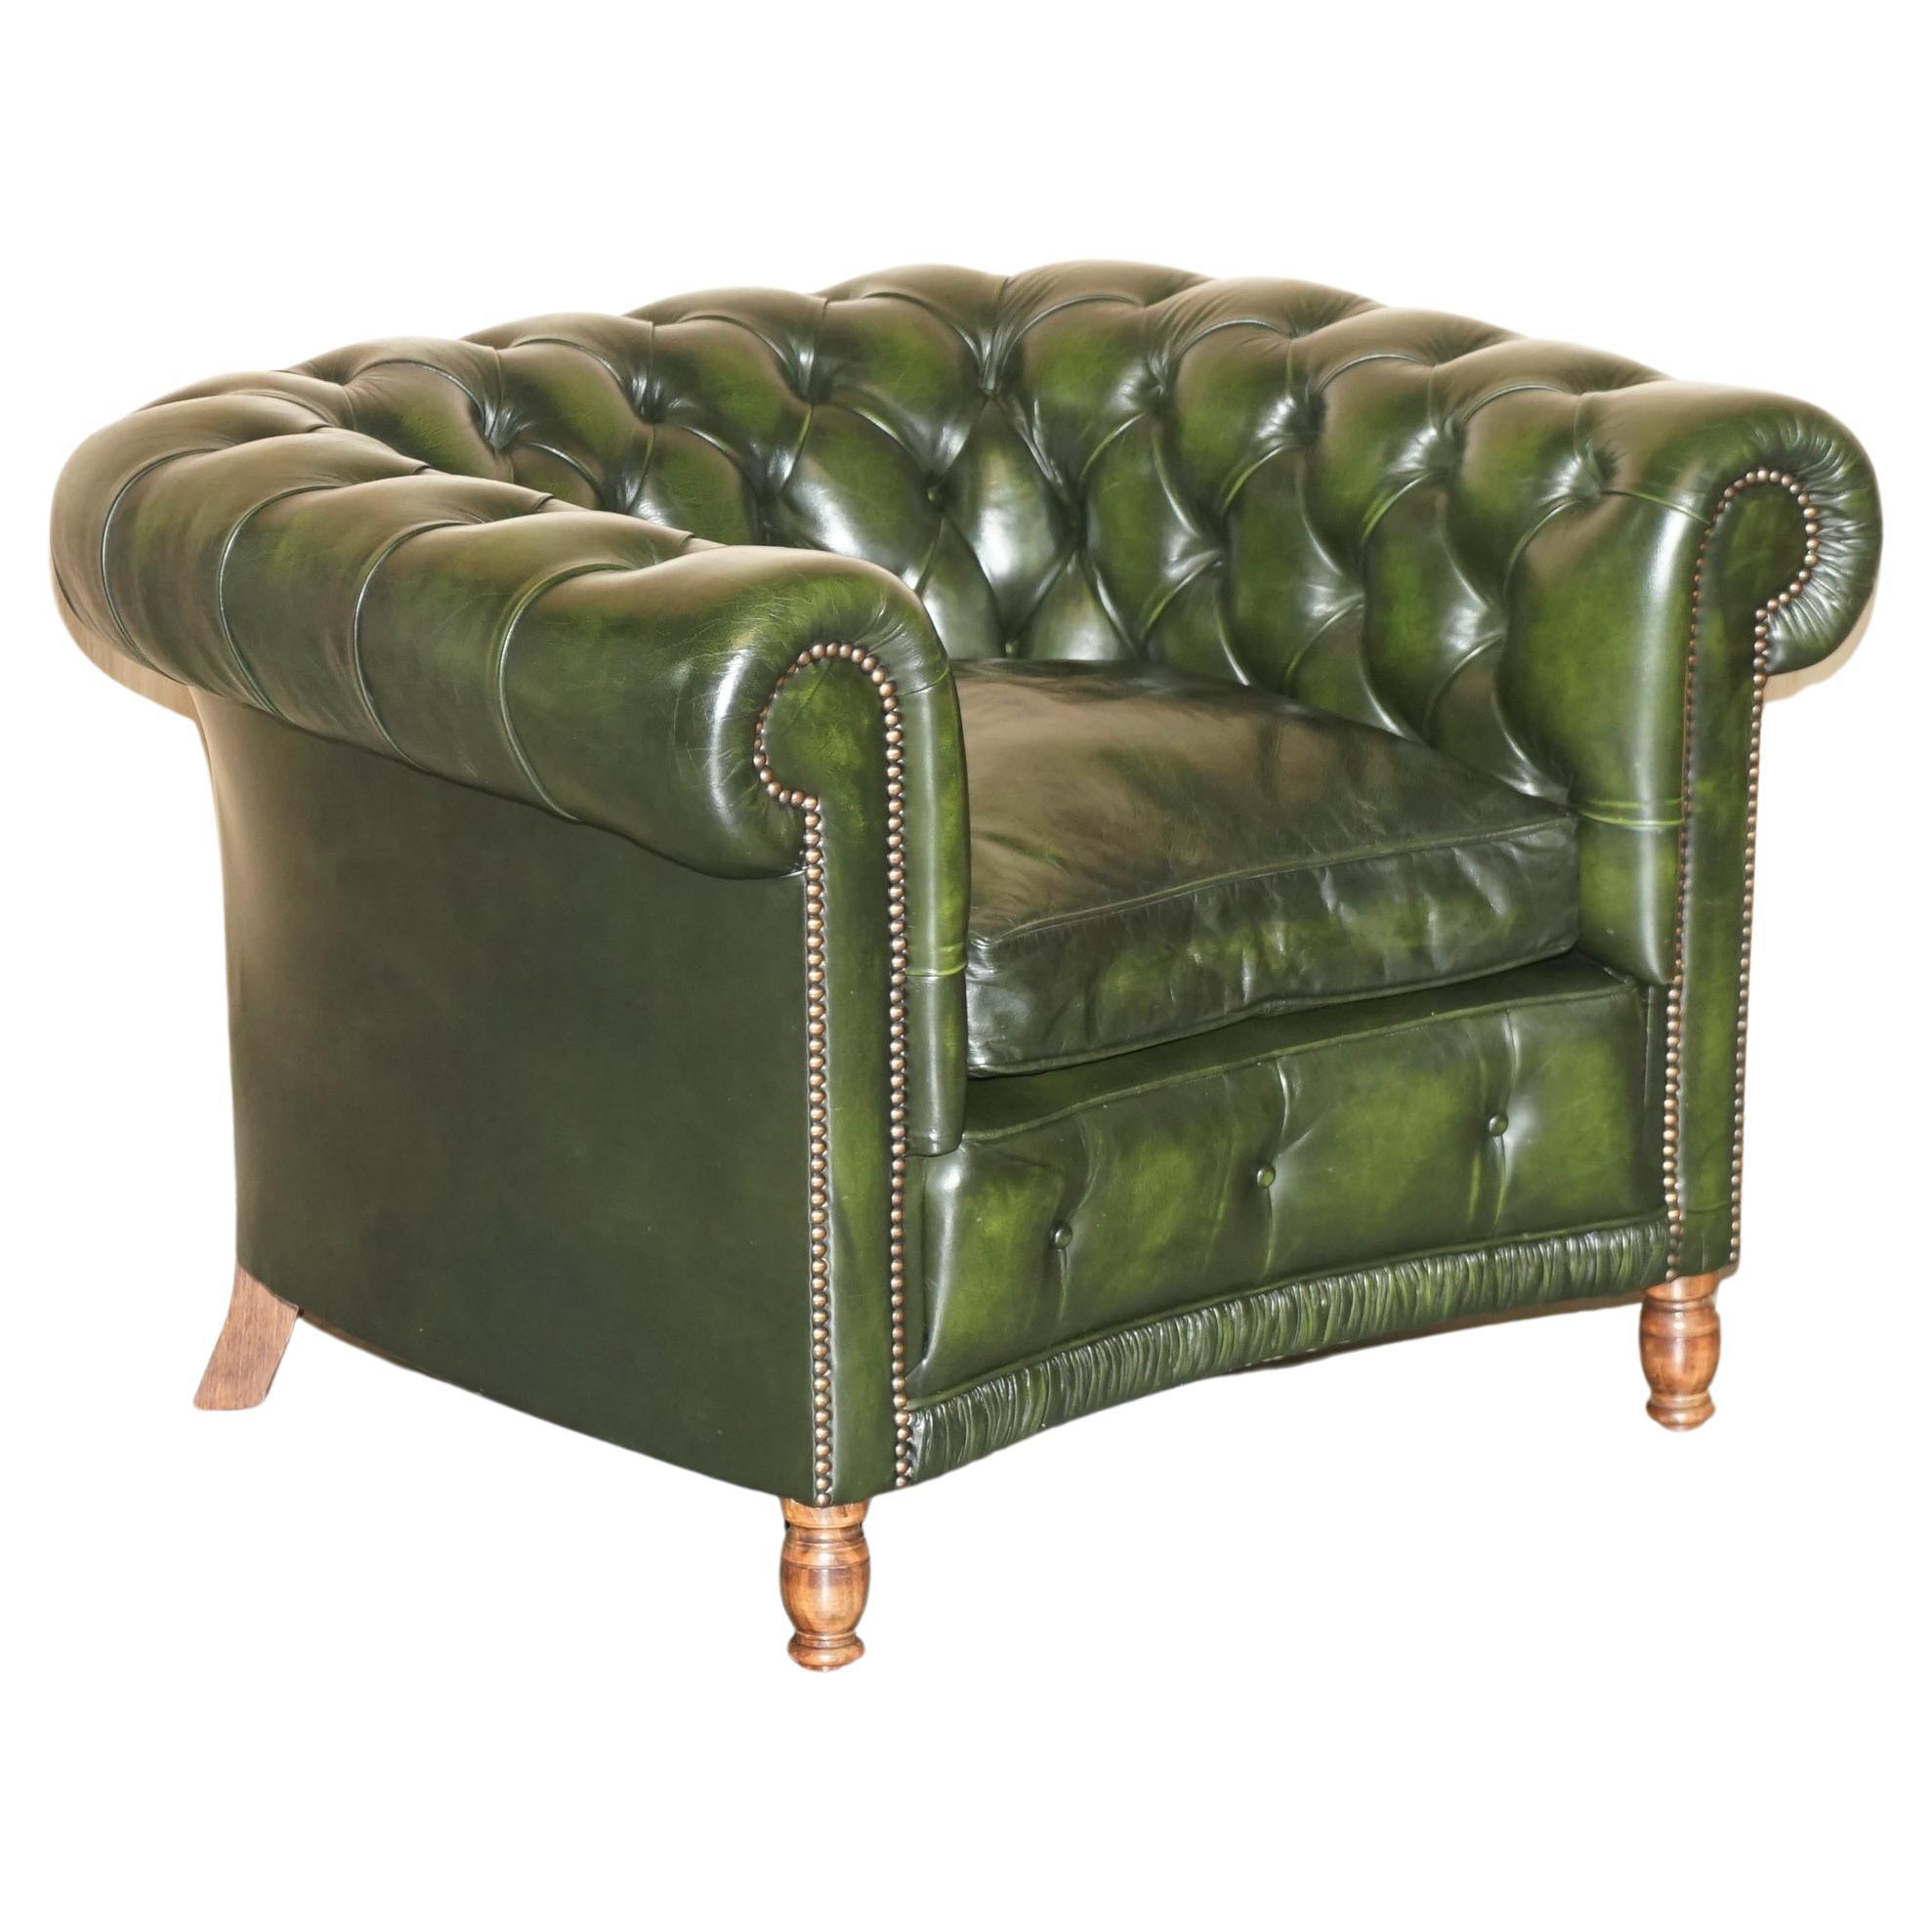 MADE IN ENGLAND REGENCY GREEN LEATHER CURVED FRONT CHESTERFIELD CLUB ARMCHAiR